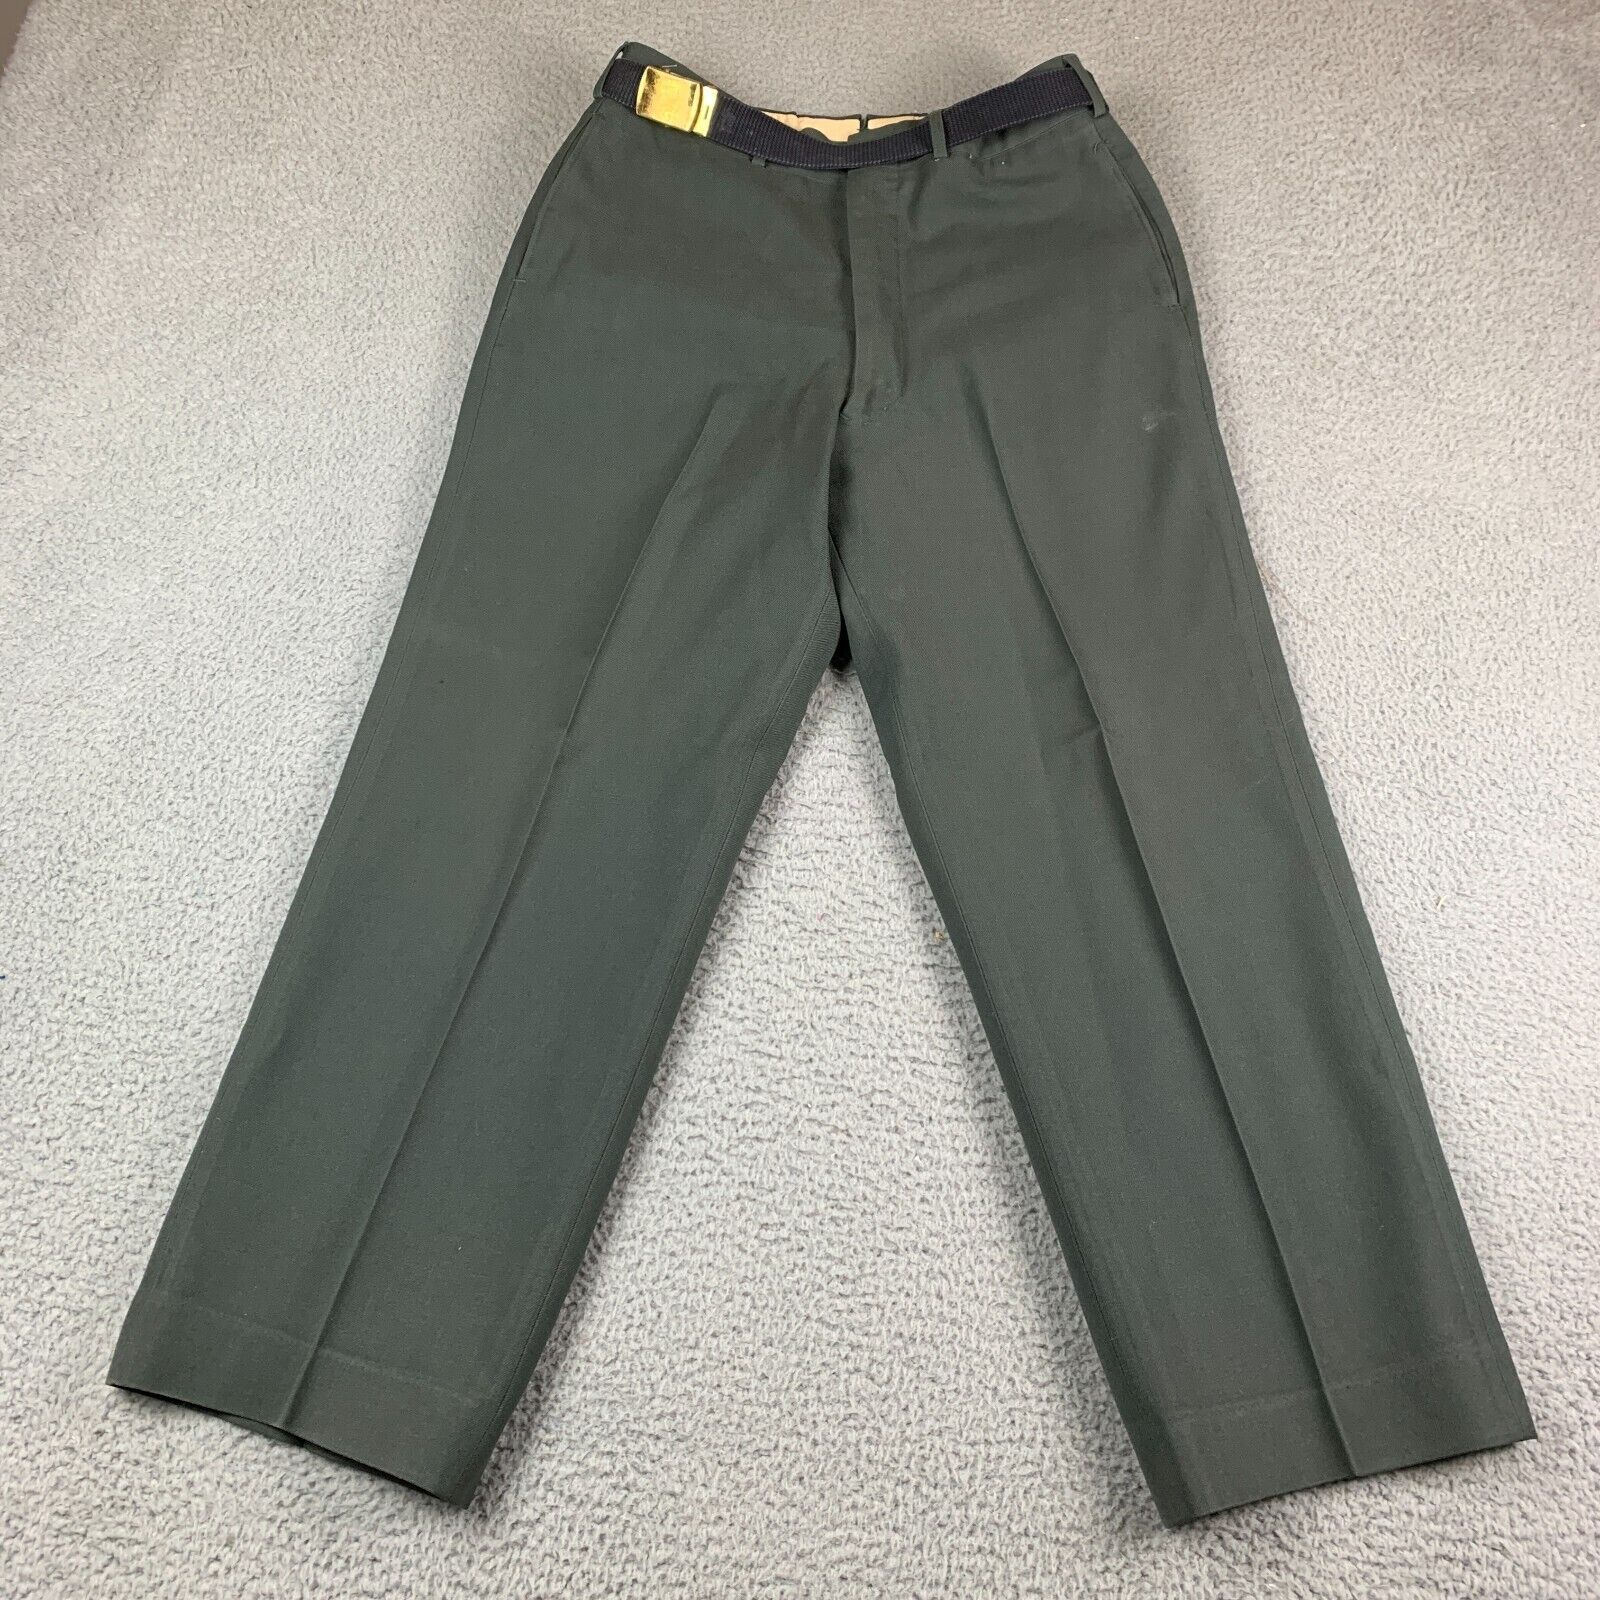 AG-44 Trousers Pants Mens 32x28 100% Wool Serge Green Belted Vtg 60s US Army